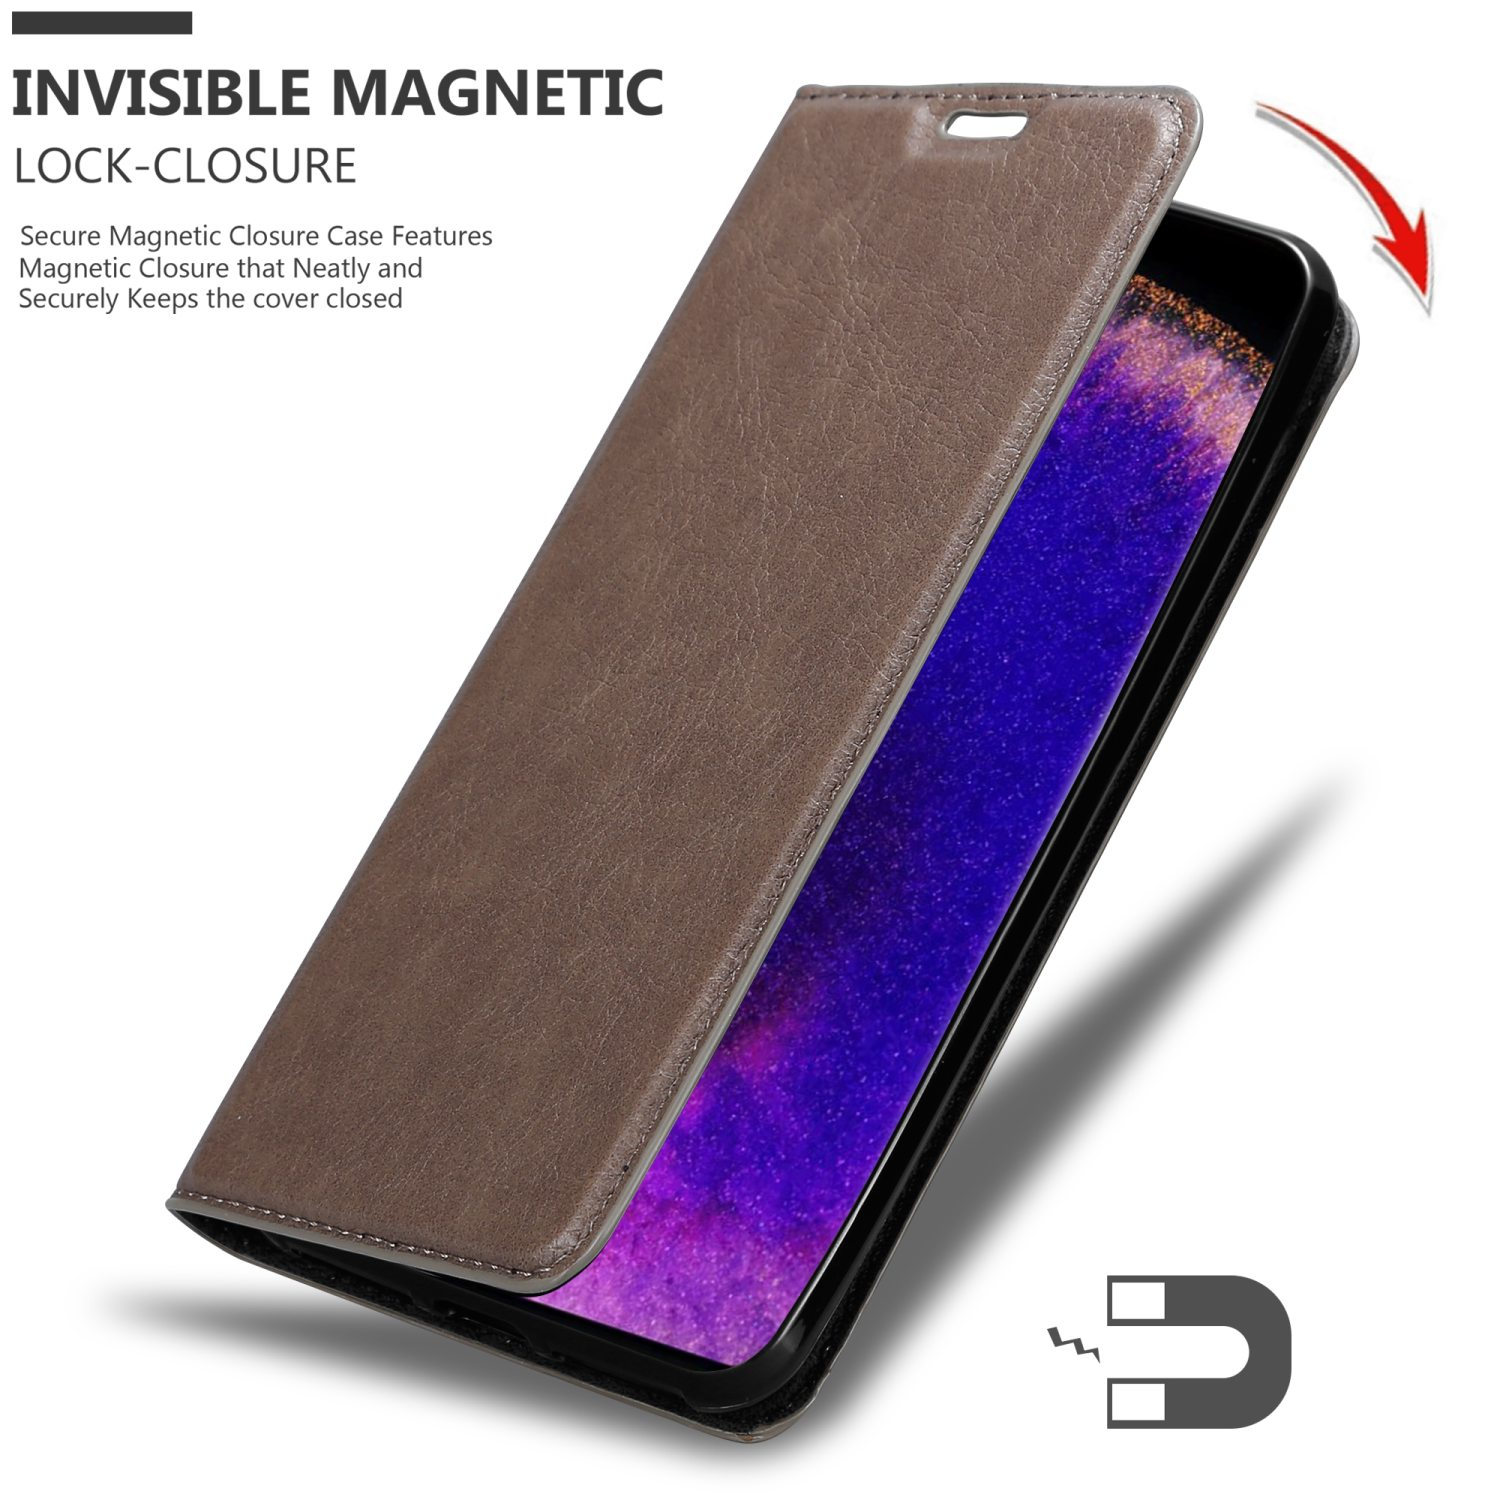 Book Oppo, PRO, BRAUN X5 Hülle Magnet, CADORABO KAFFEE Invisible FIND Bookcover,